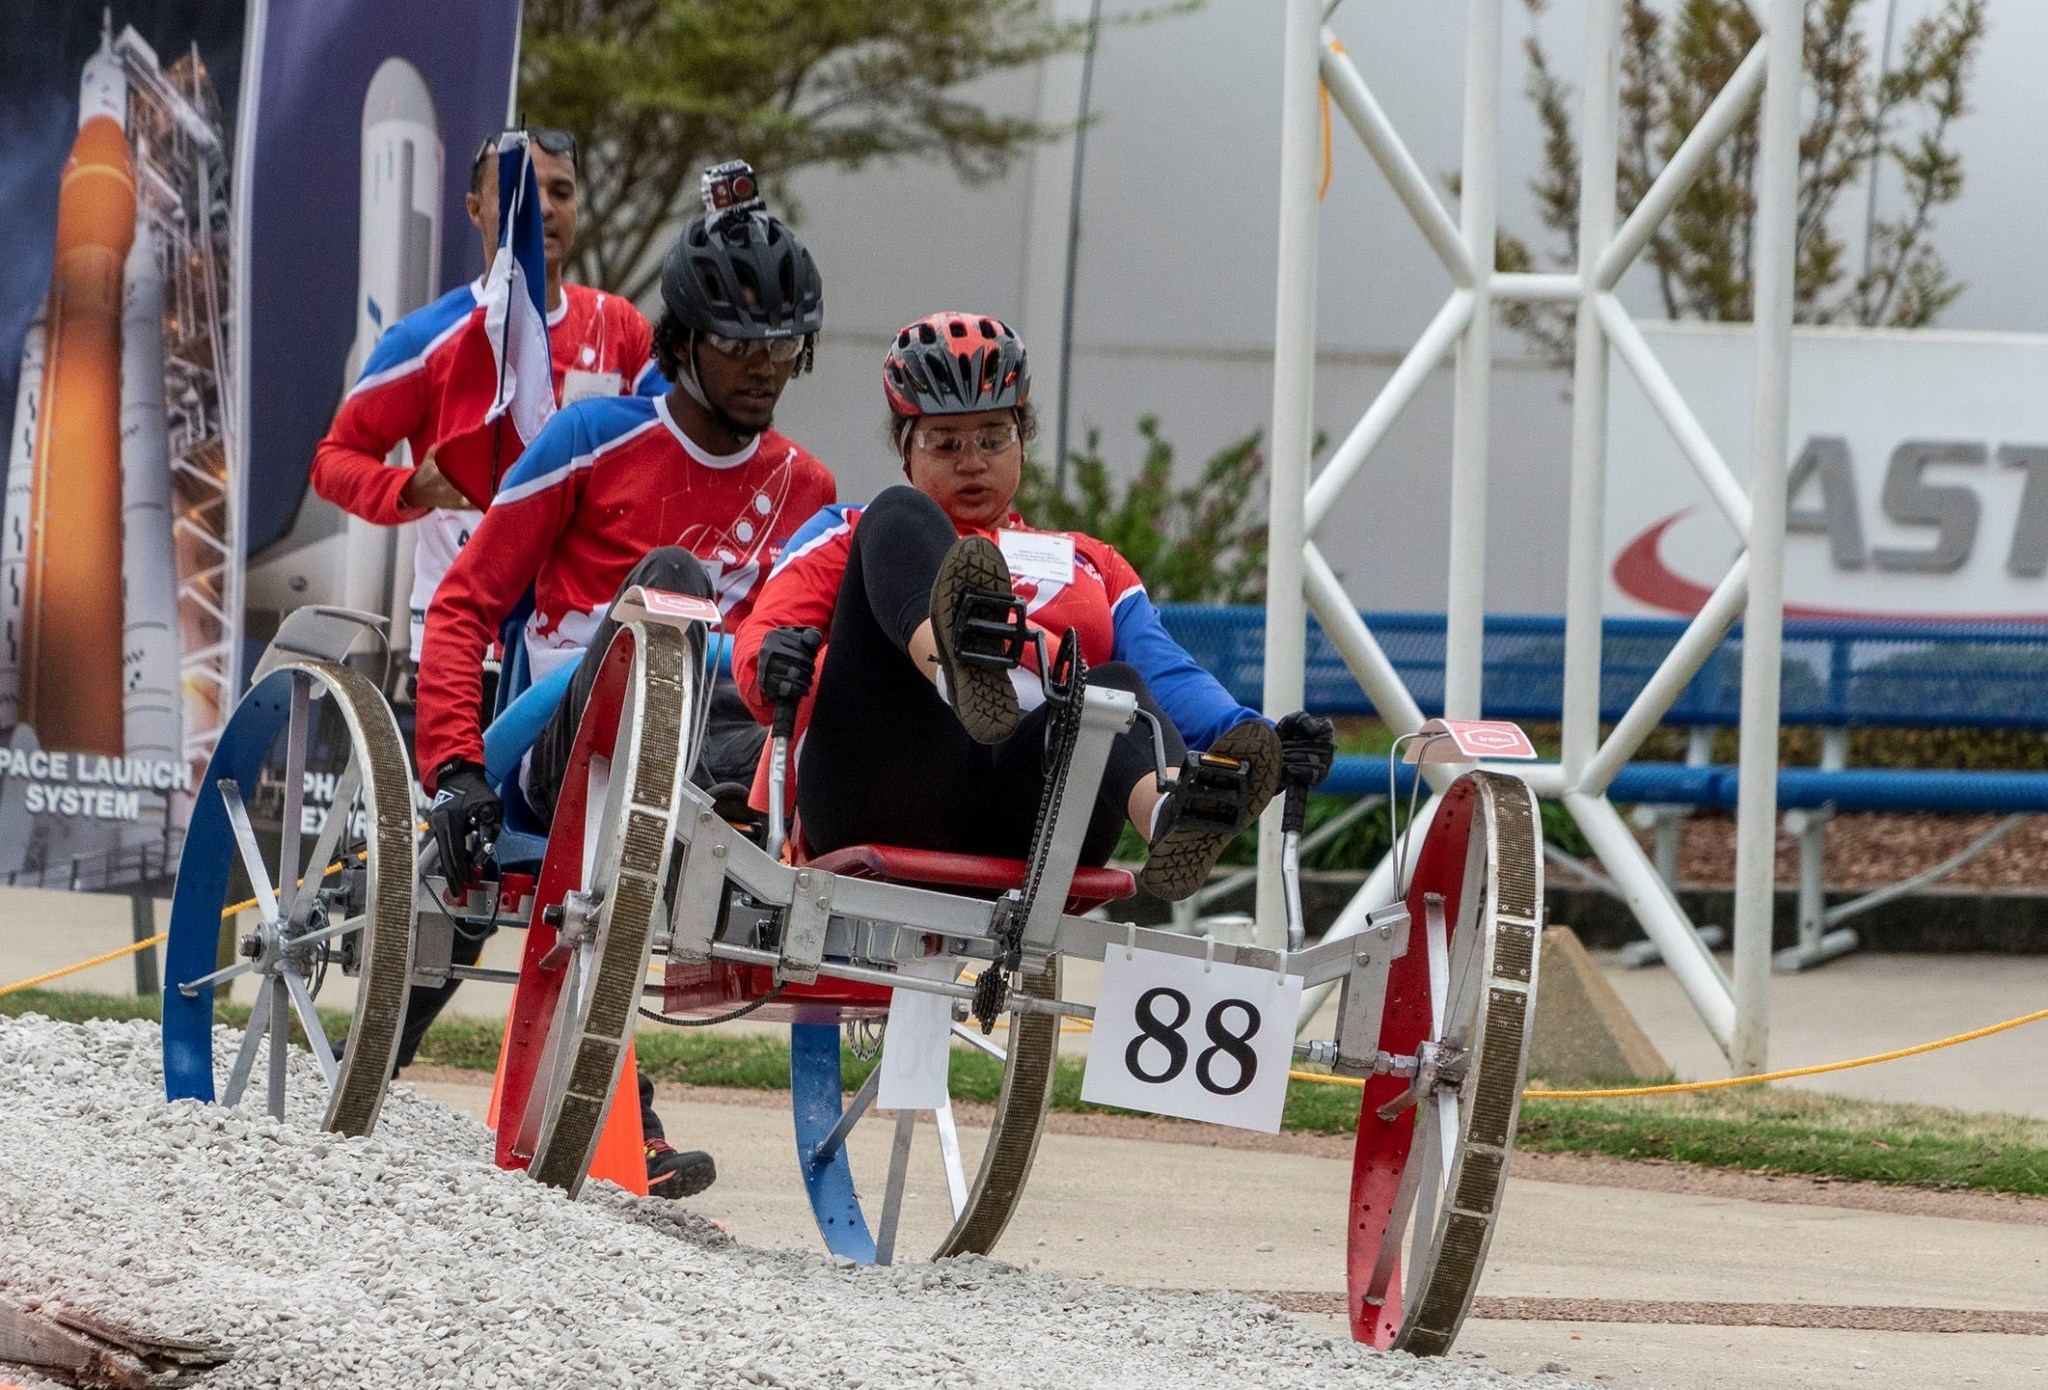 Nearly 100 teams took part in the 2019 Human Exploration Rover Challenge, held last April at the U.S. Space & Rocket Center.